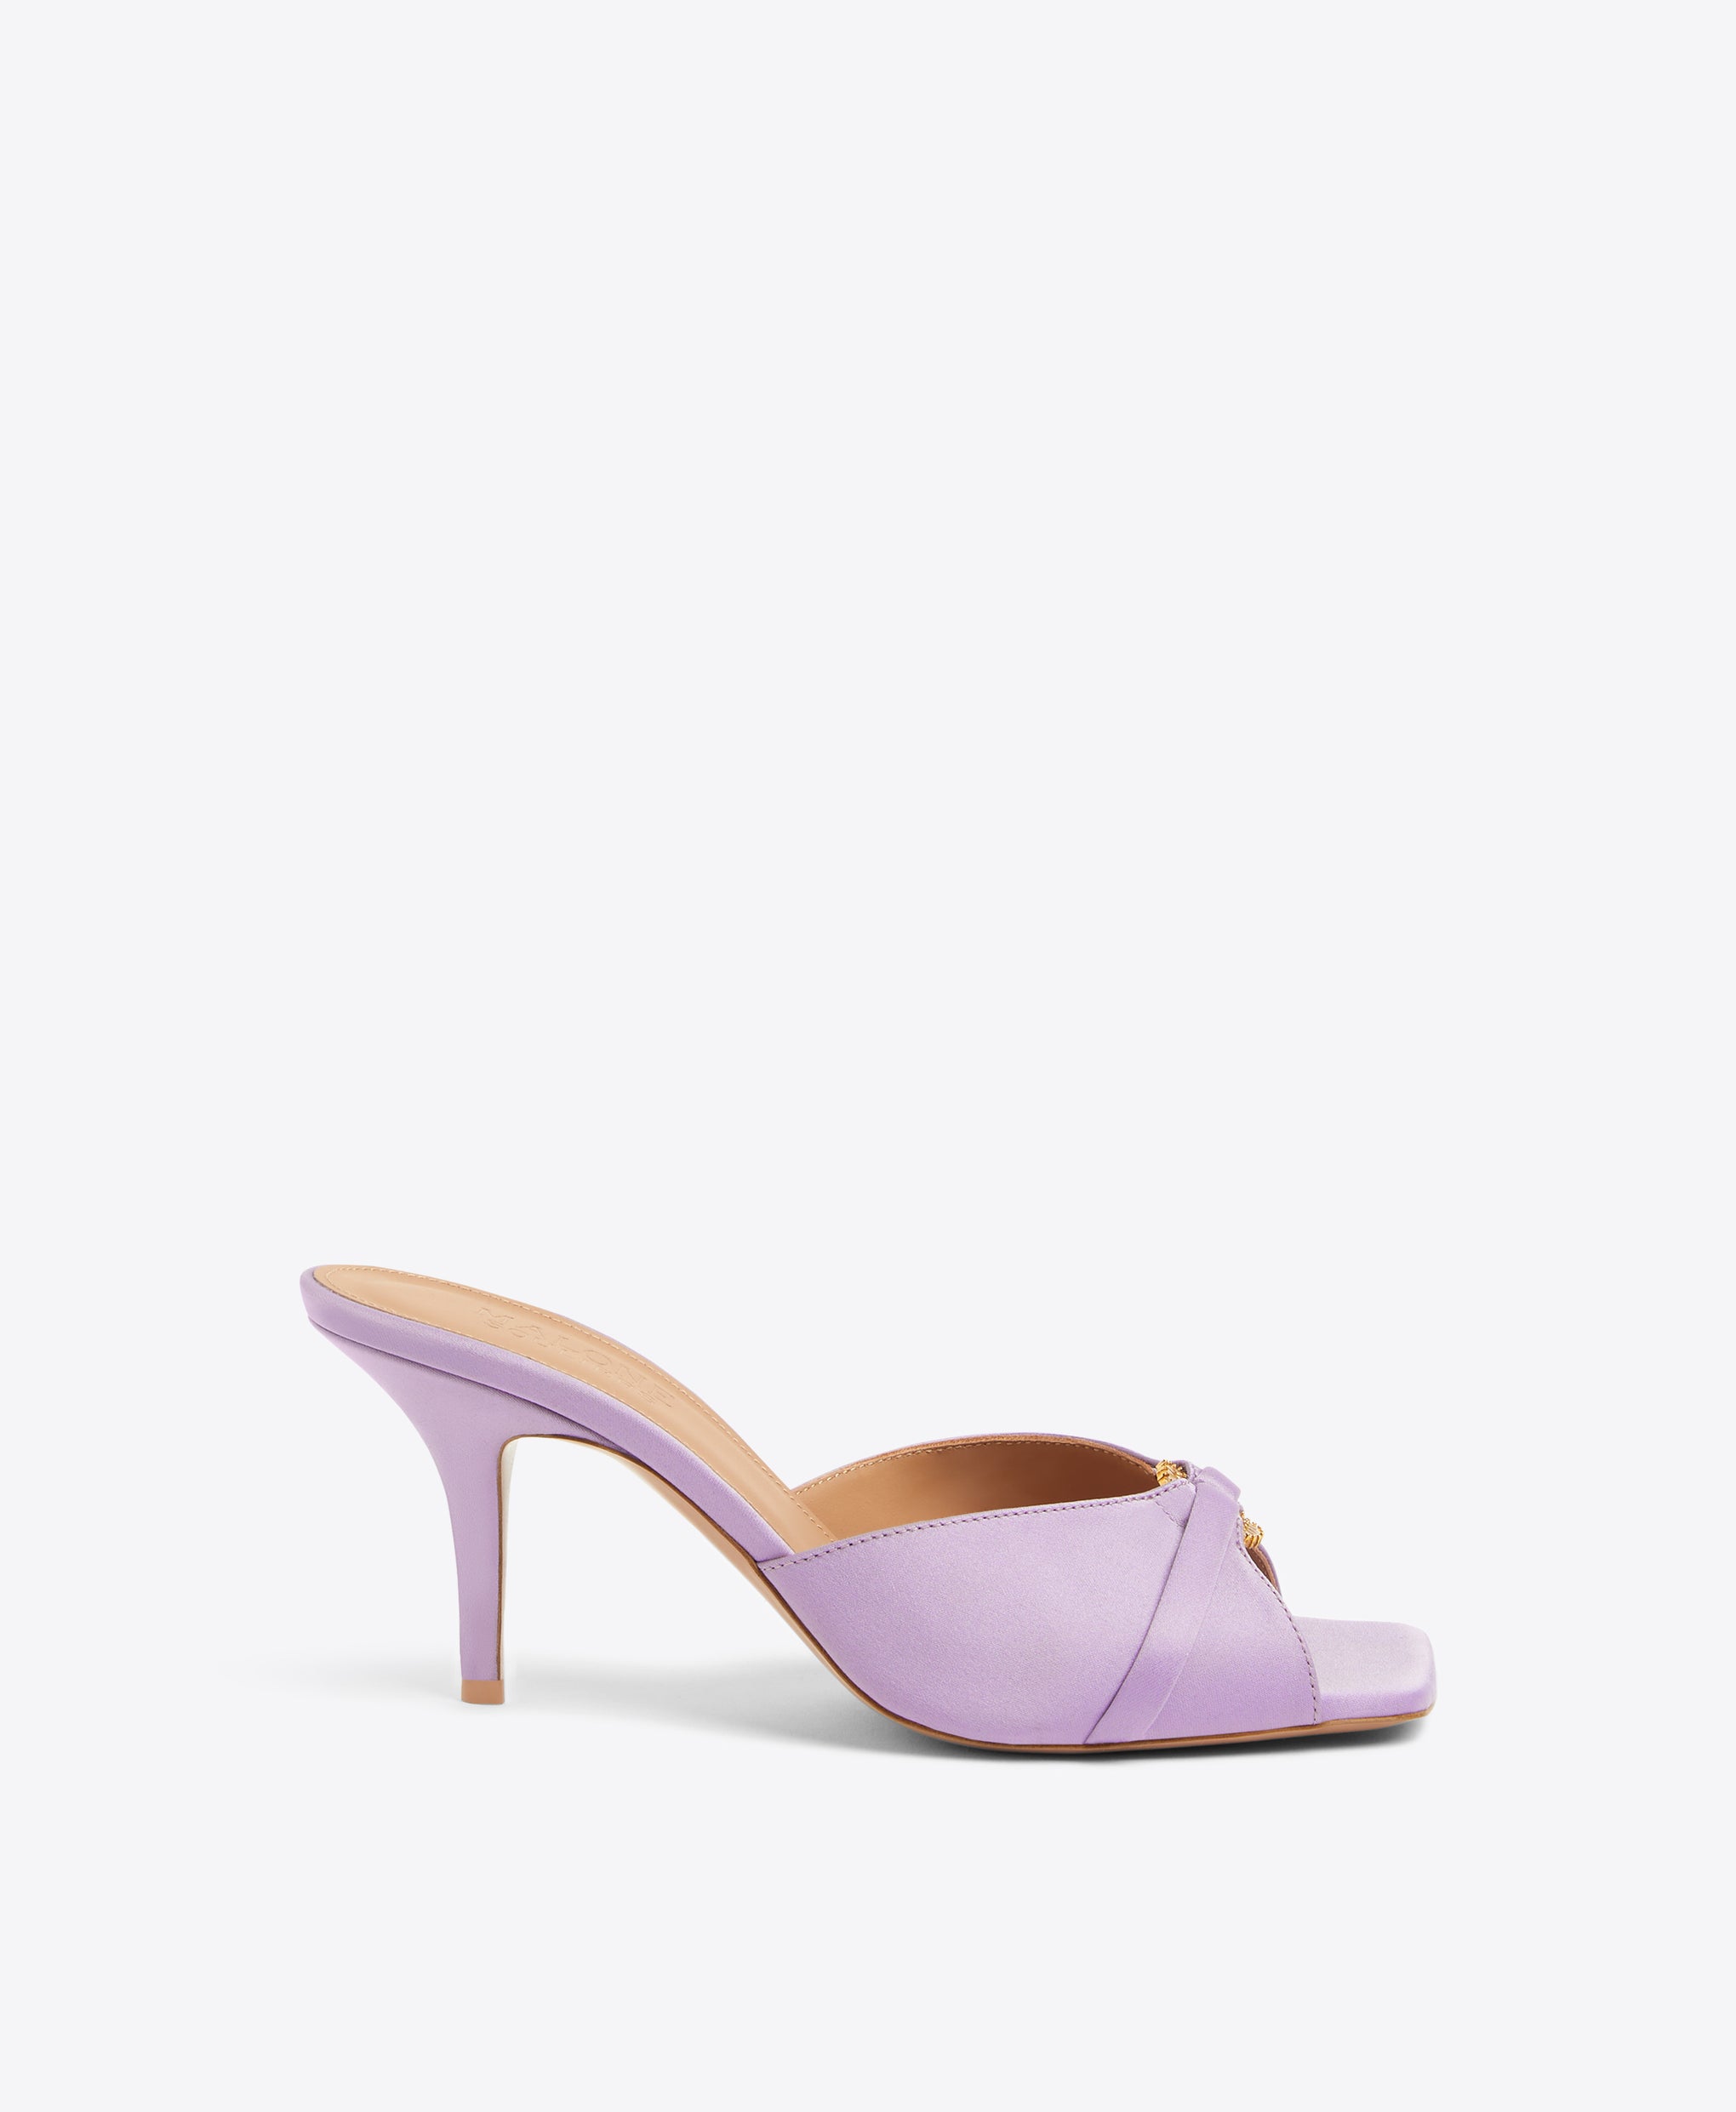 Patricia 70 Lilac Satin Heeled Sandals Malone Souliers